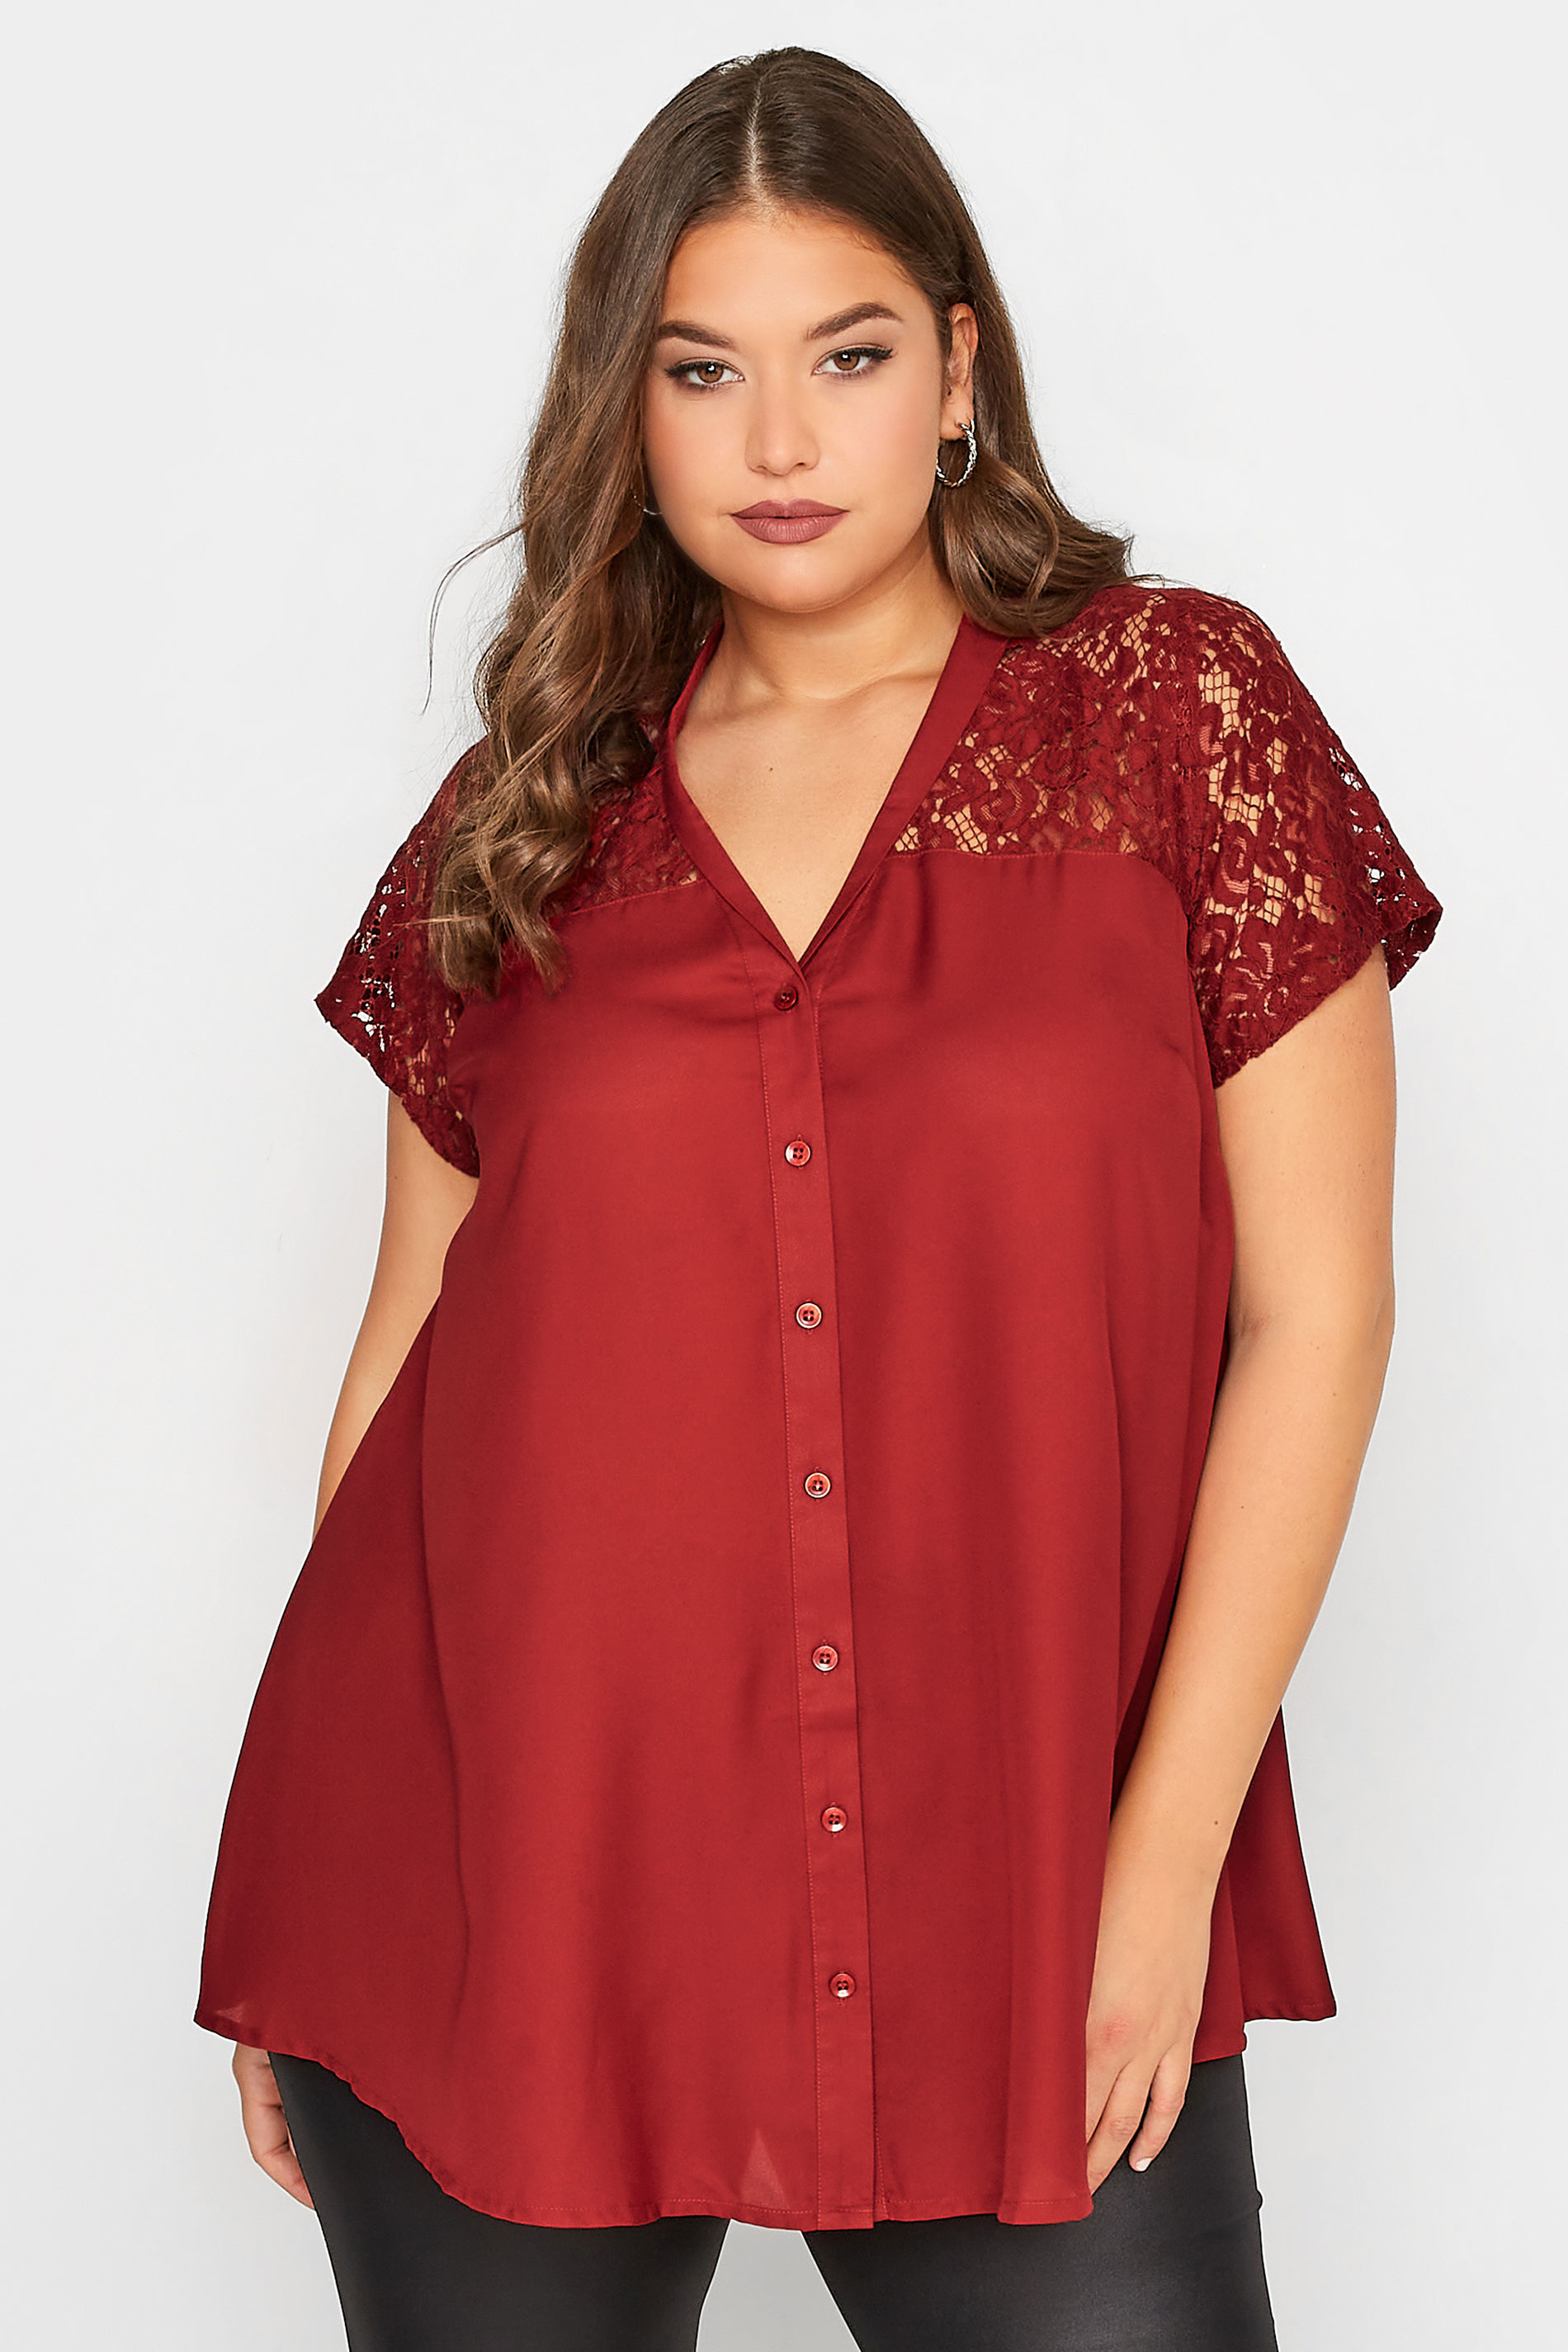 LIMITED COLLECTION Curve Wine Red Lace Insert Blouse 1